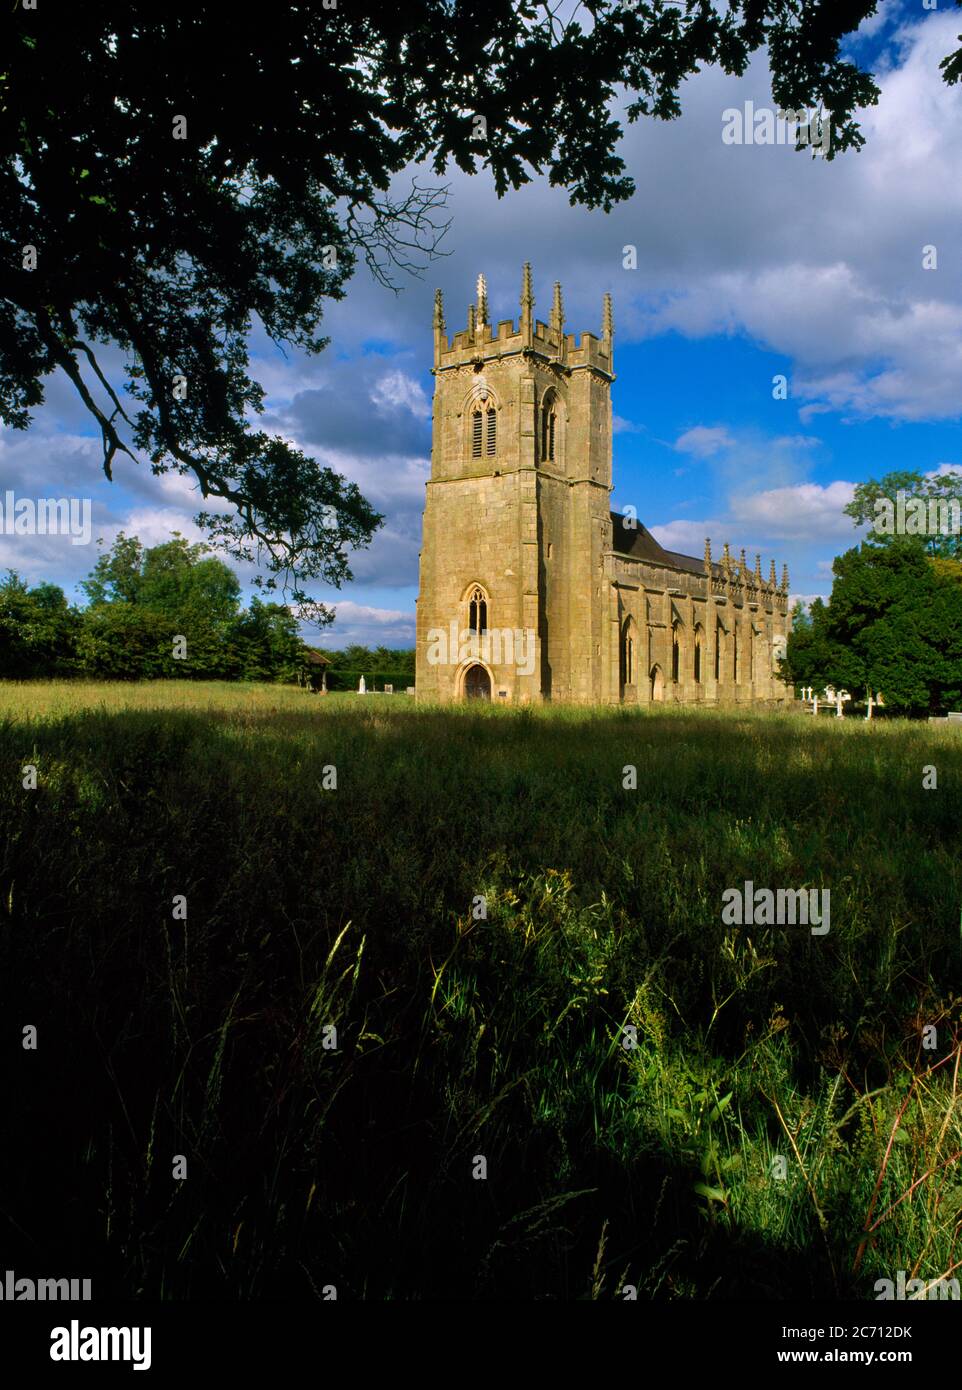 Battlefield, England, UK: Perpendicular church of the chantry college founded 1406 for the souls of those slain at the Battle of Shrewsbury in 1403. Stock Photo